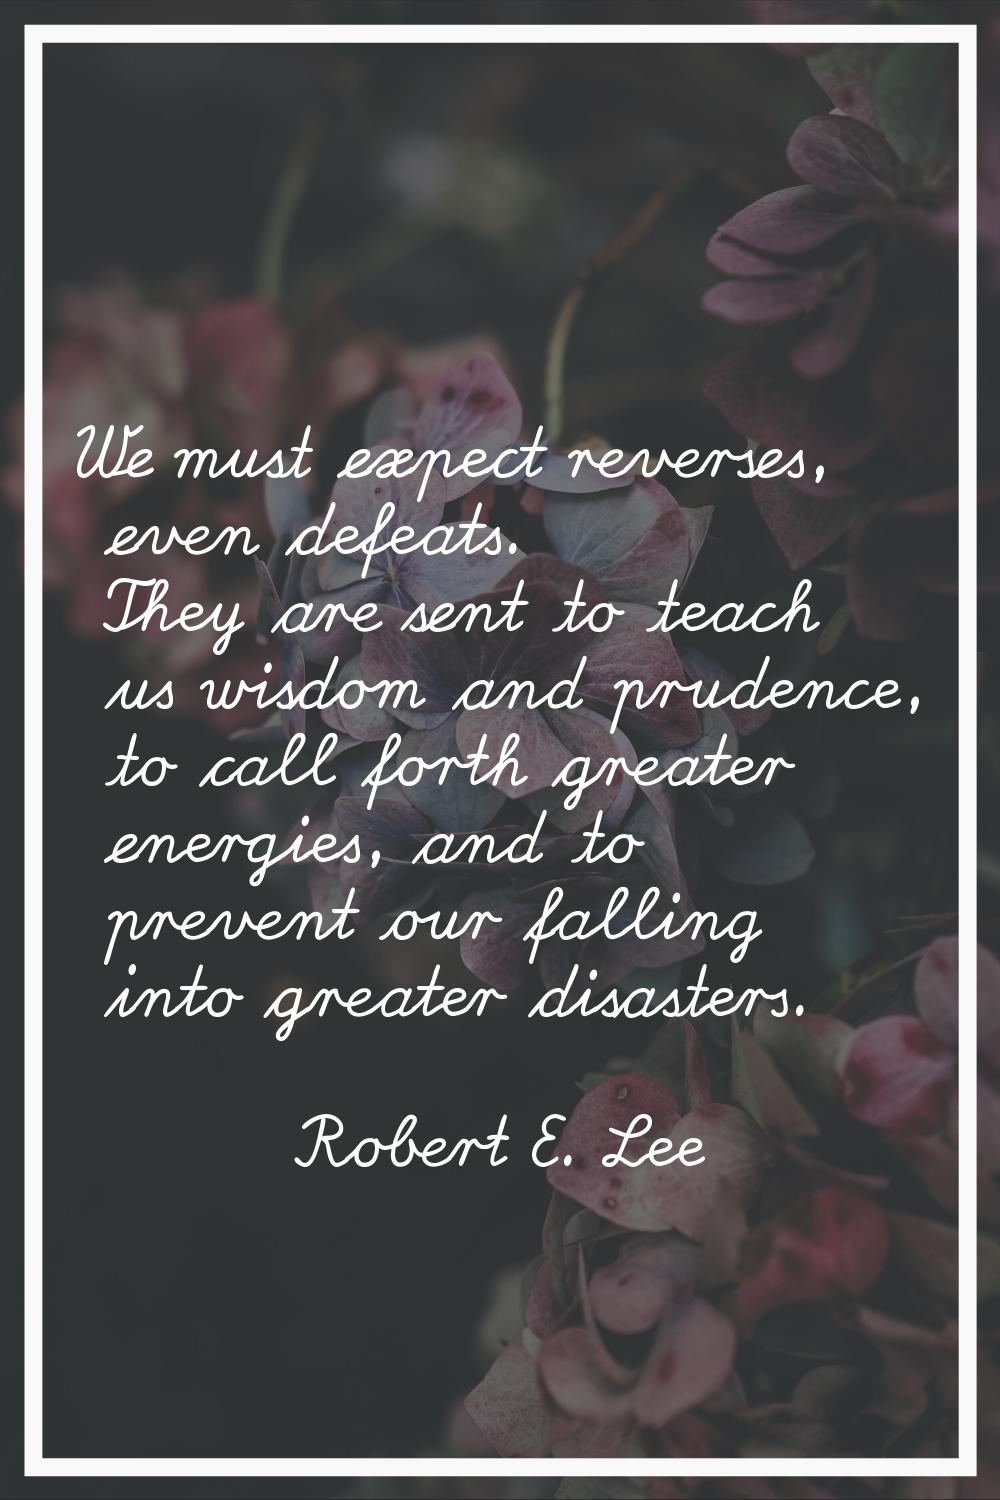 We must expect reverses, even defeats. They are sent to teach us wisdom and prudence, to call forth